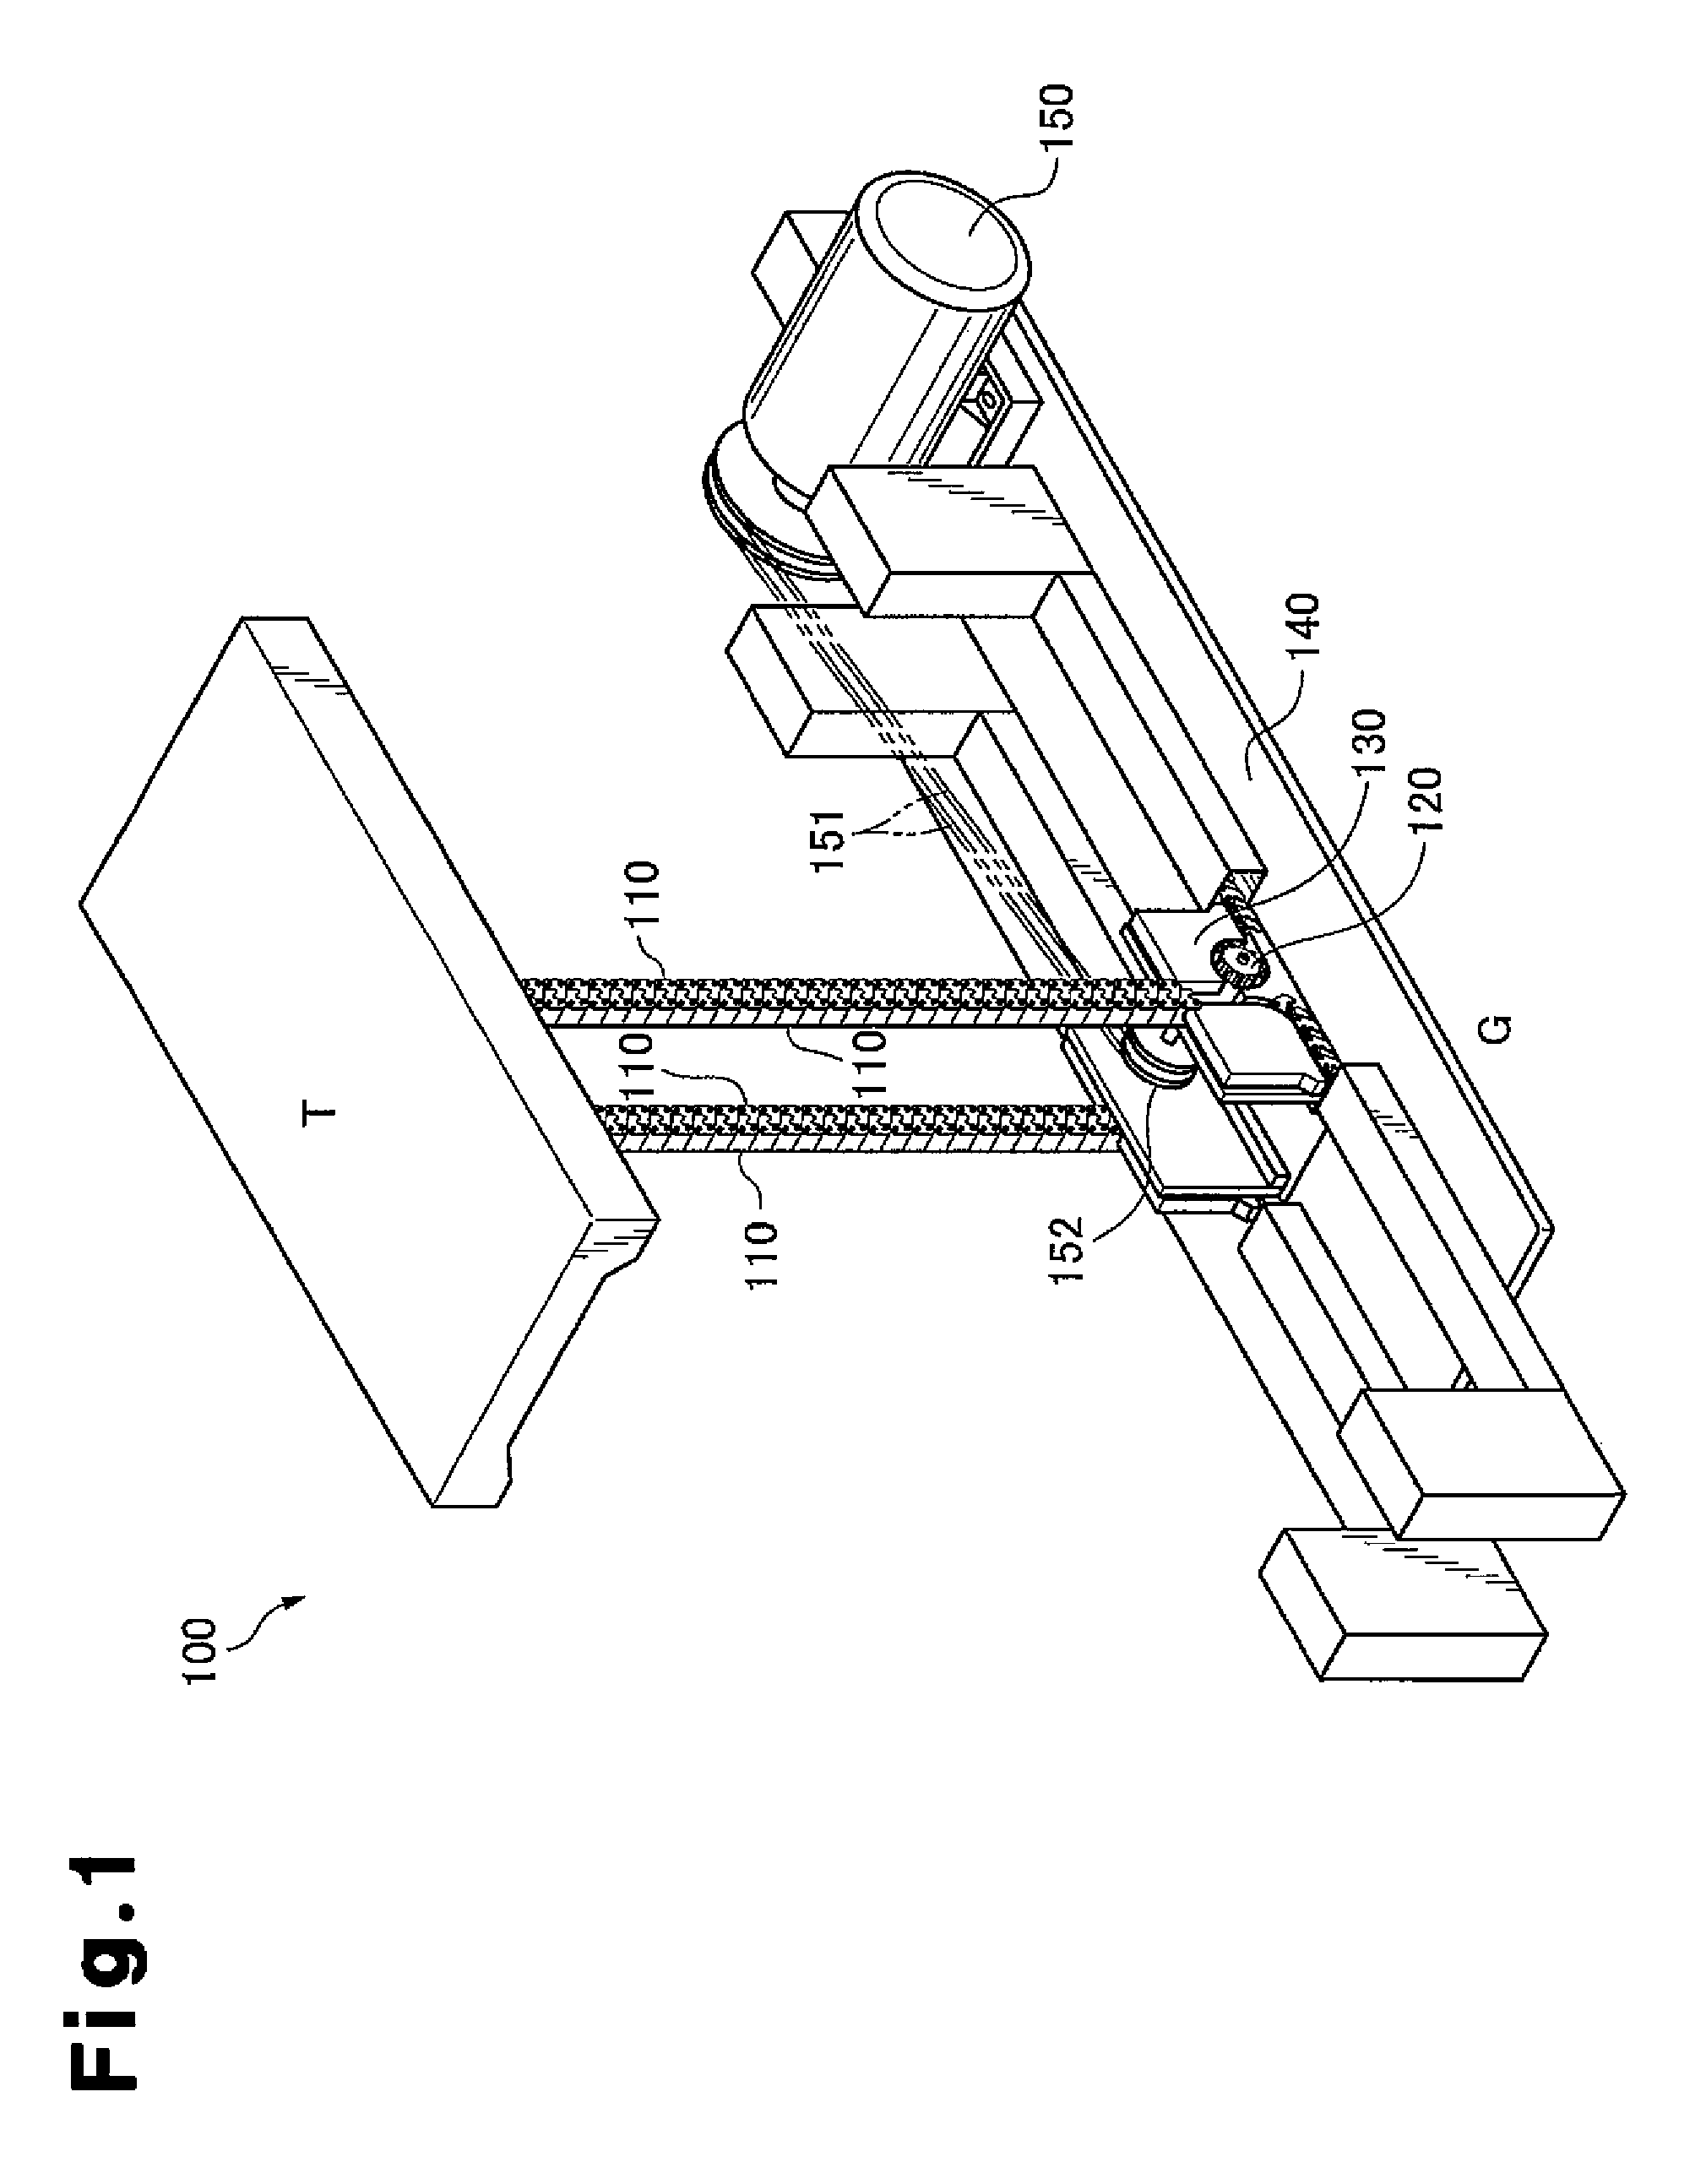 Advancing/retracting actuation device with meshing chain